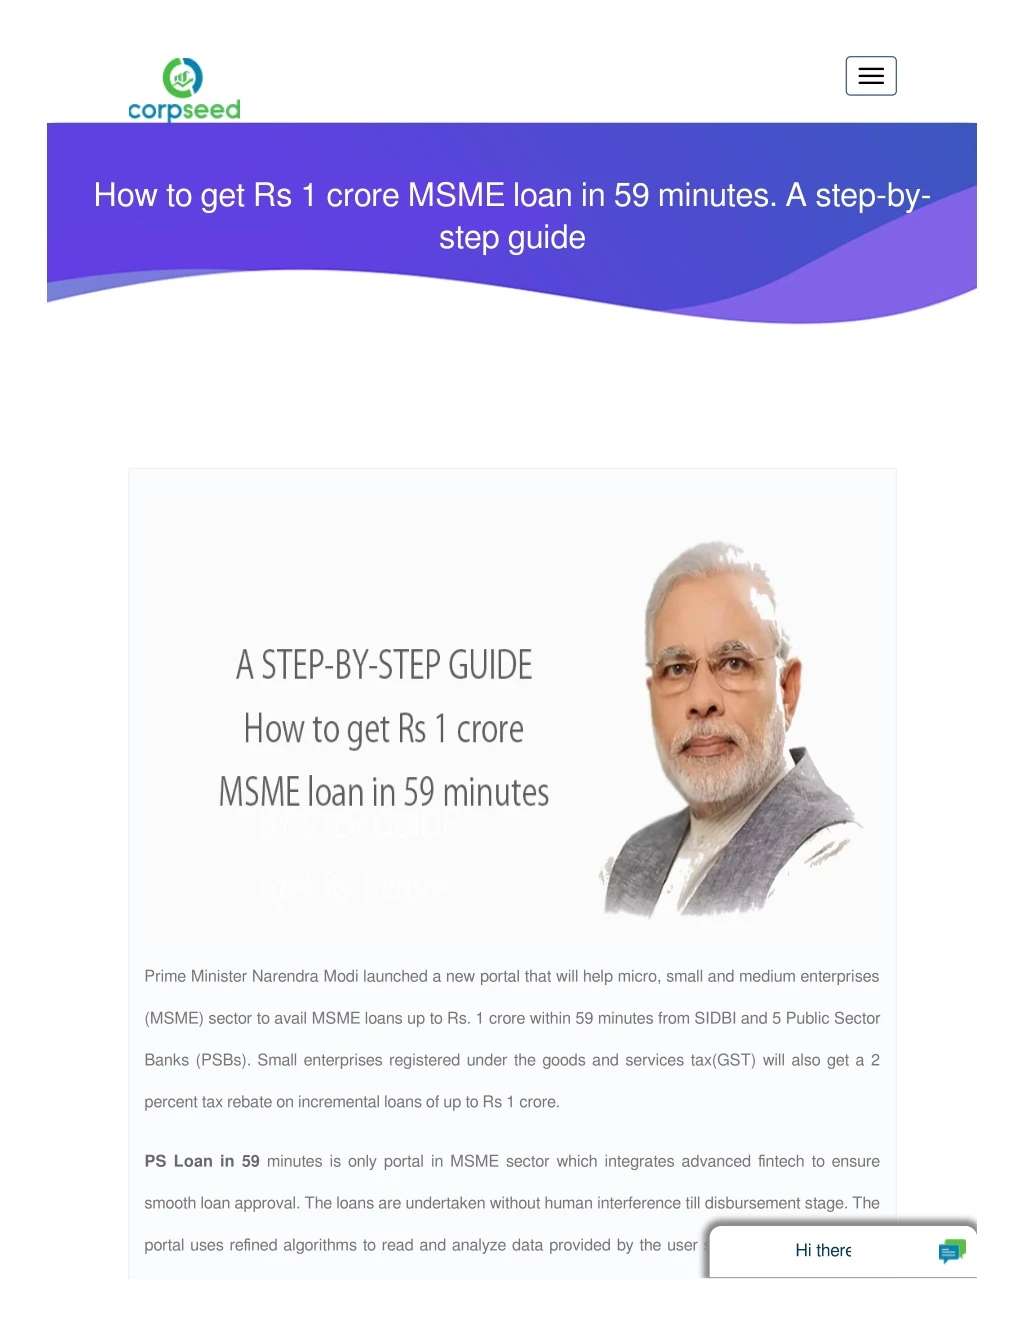 how to get rs 1 crore msme loan in 59 minutes